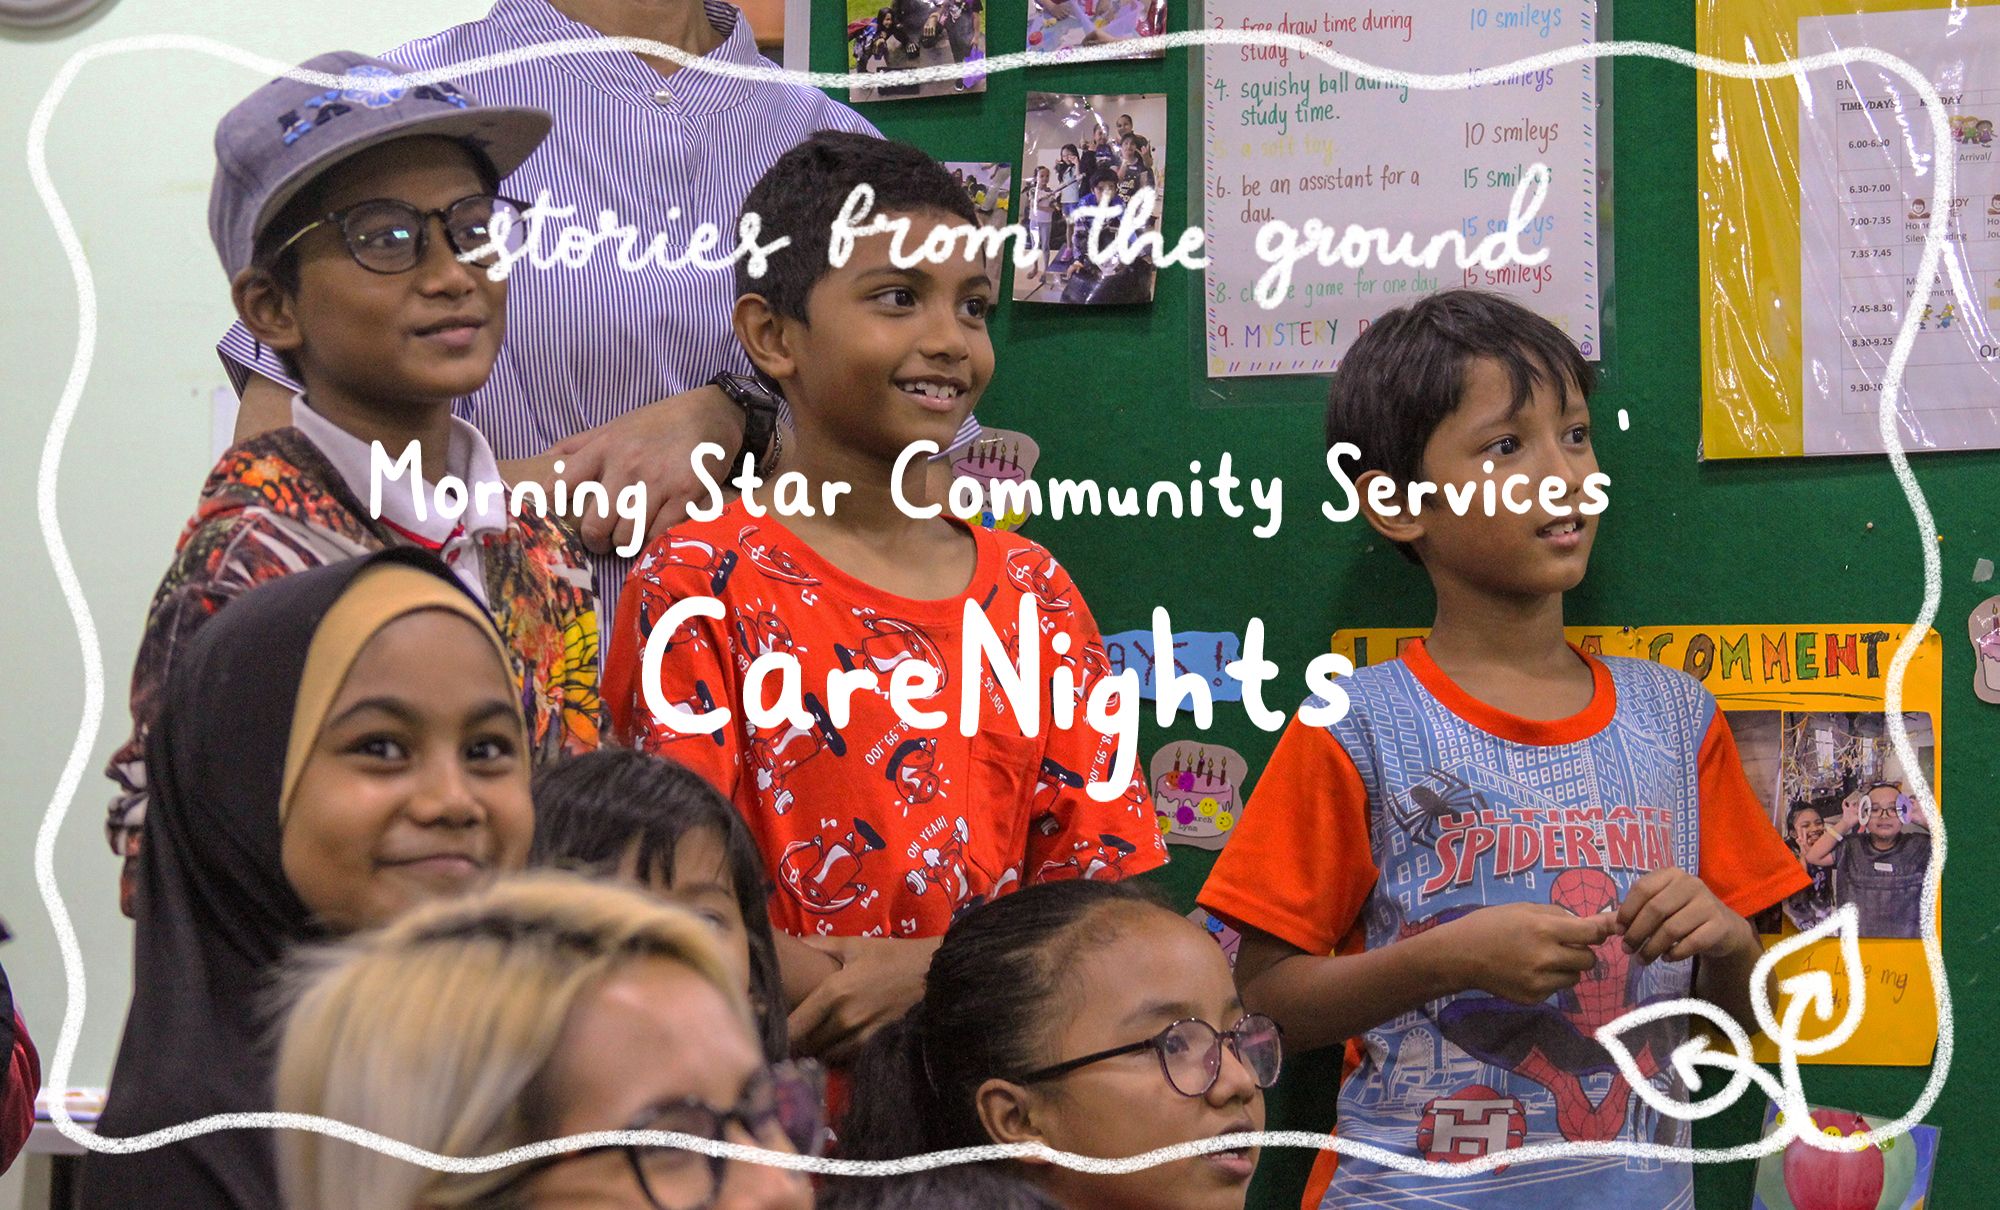 Stories from the Ground: An Evening at CareNights